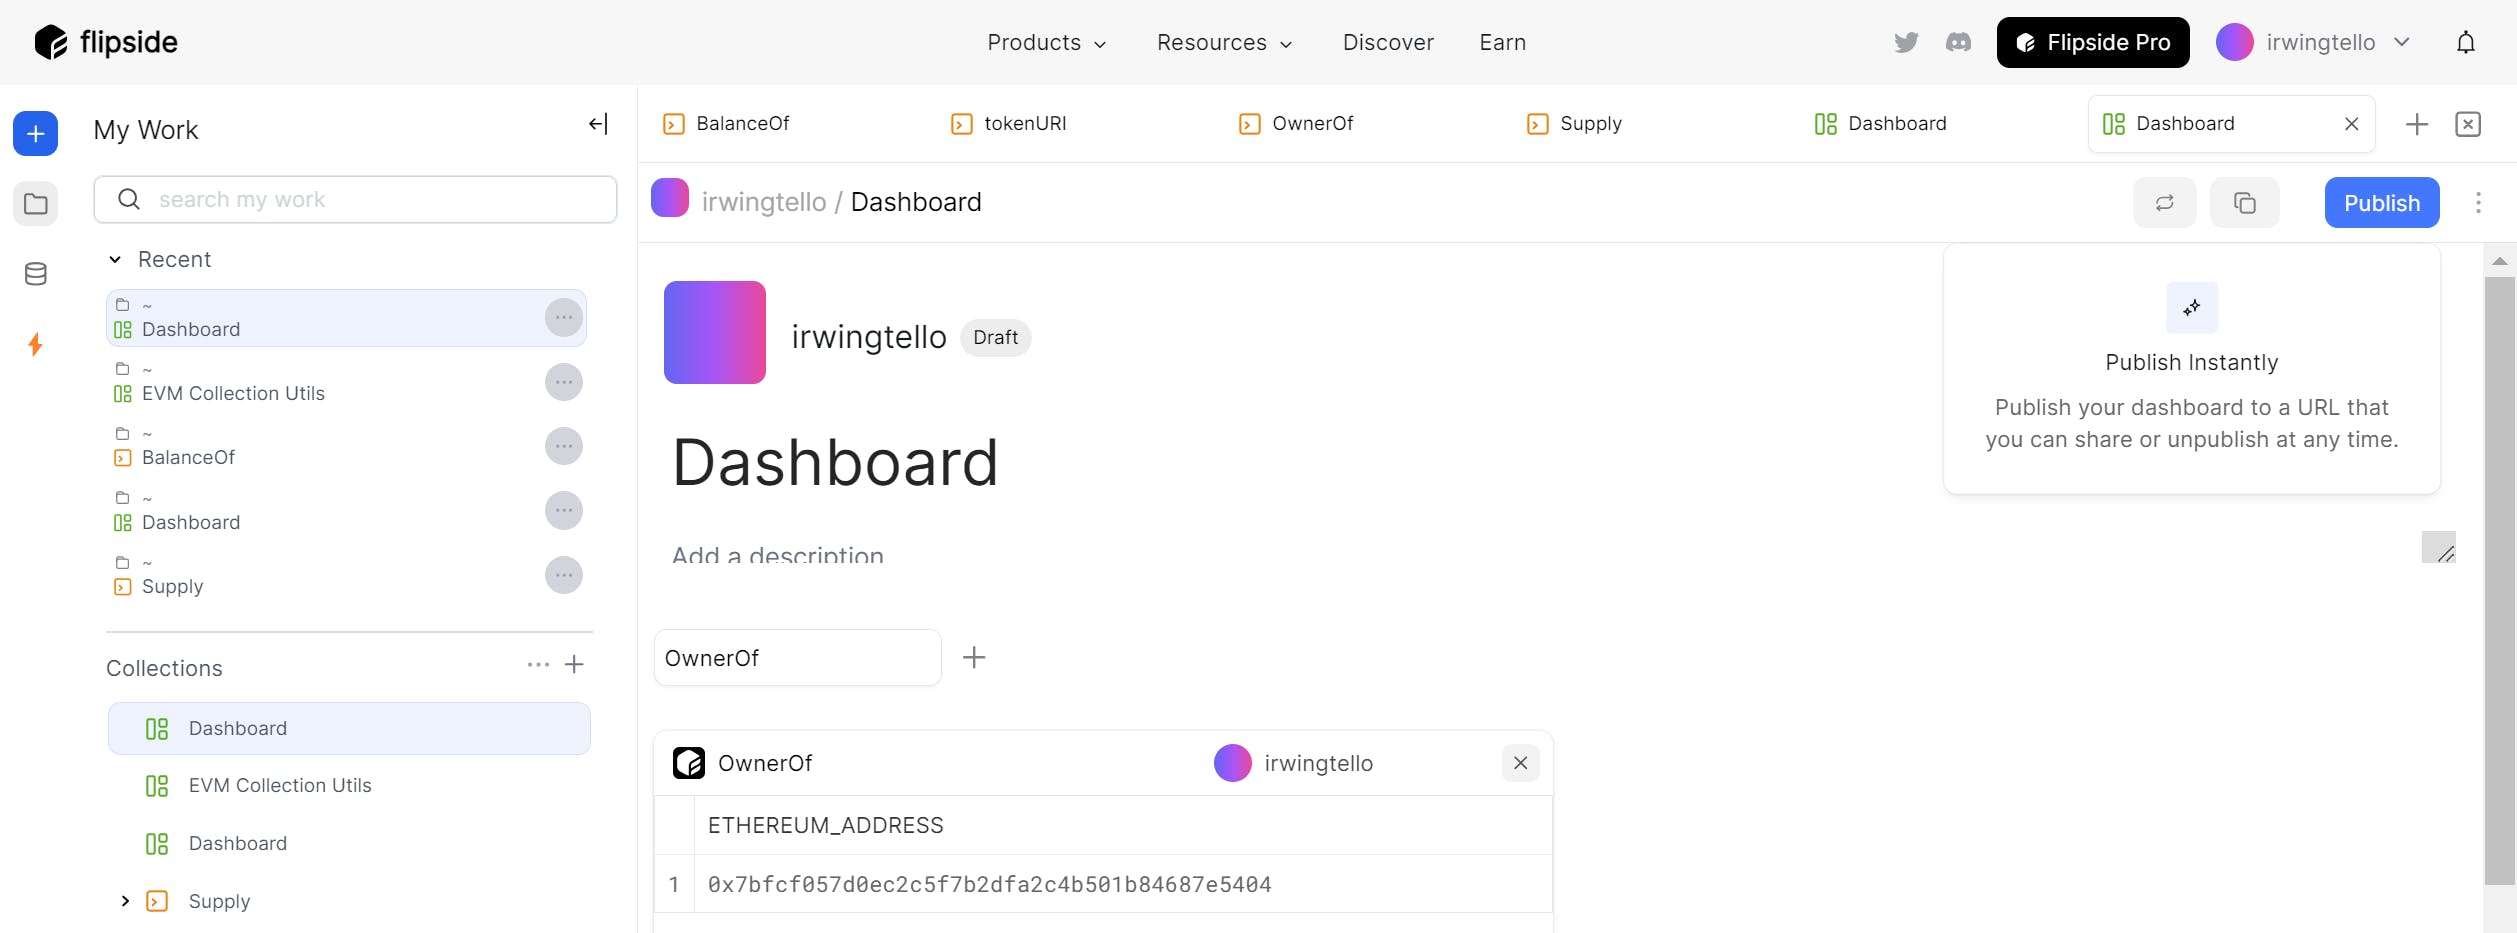 Making public available our Flipside Dashboard